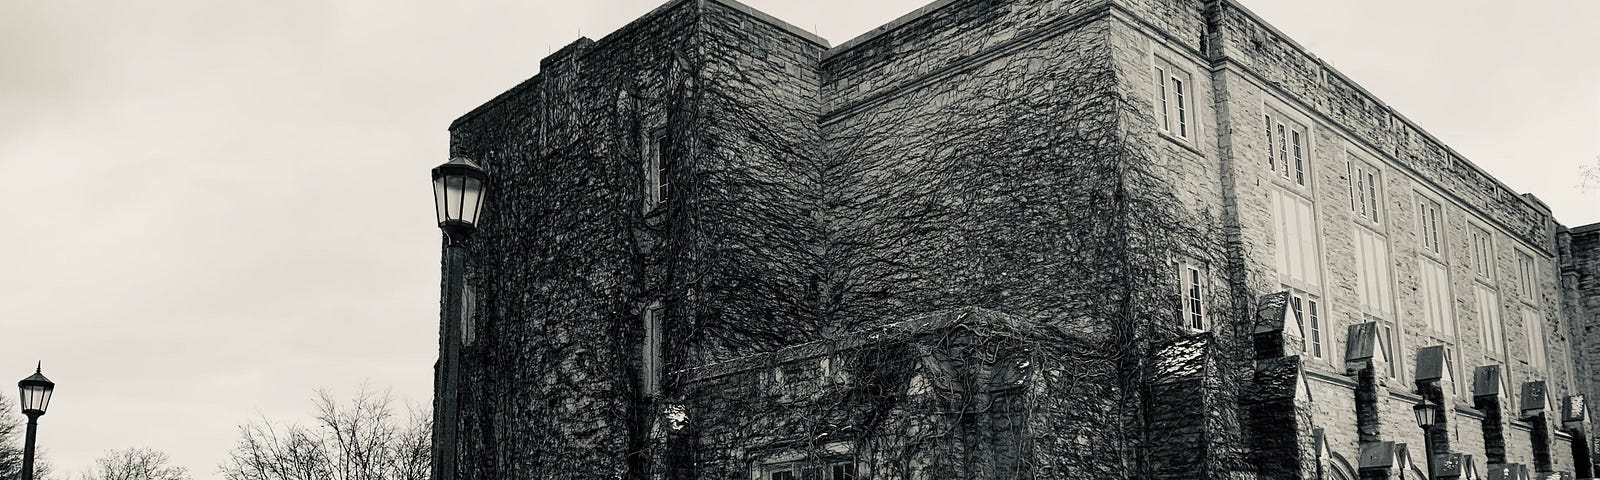 a black and white photo of an old building- there are vines growing along the sides of it